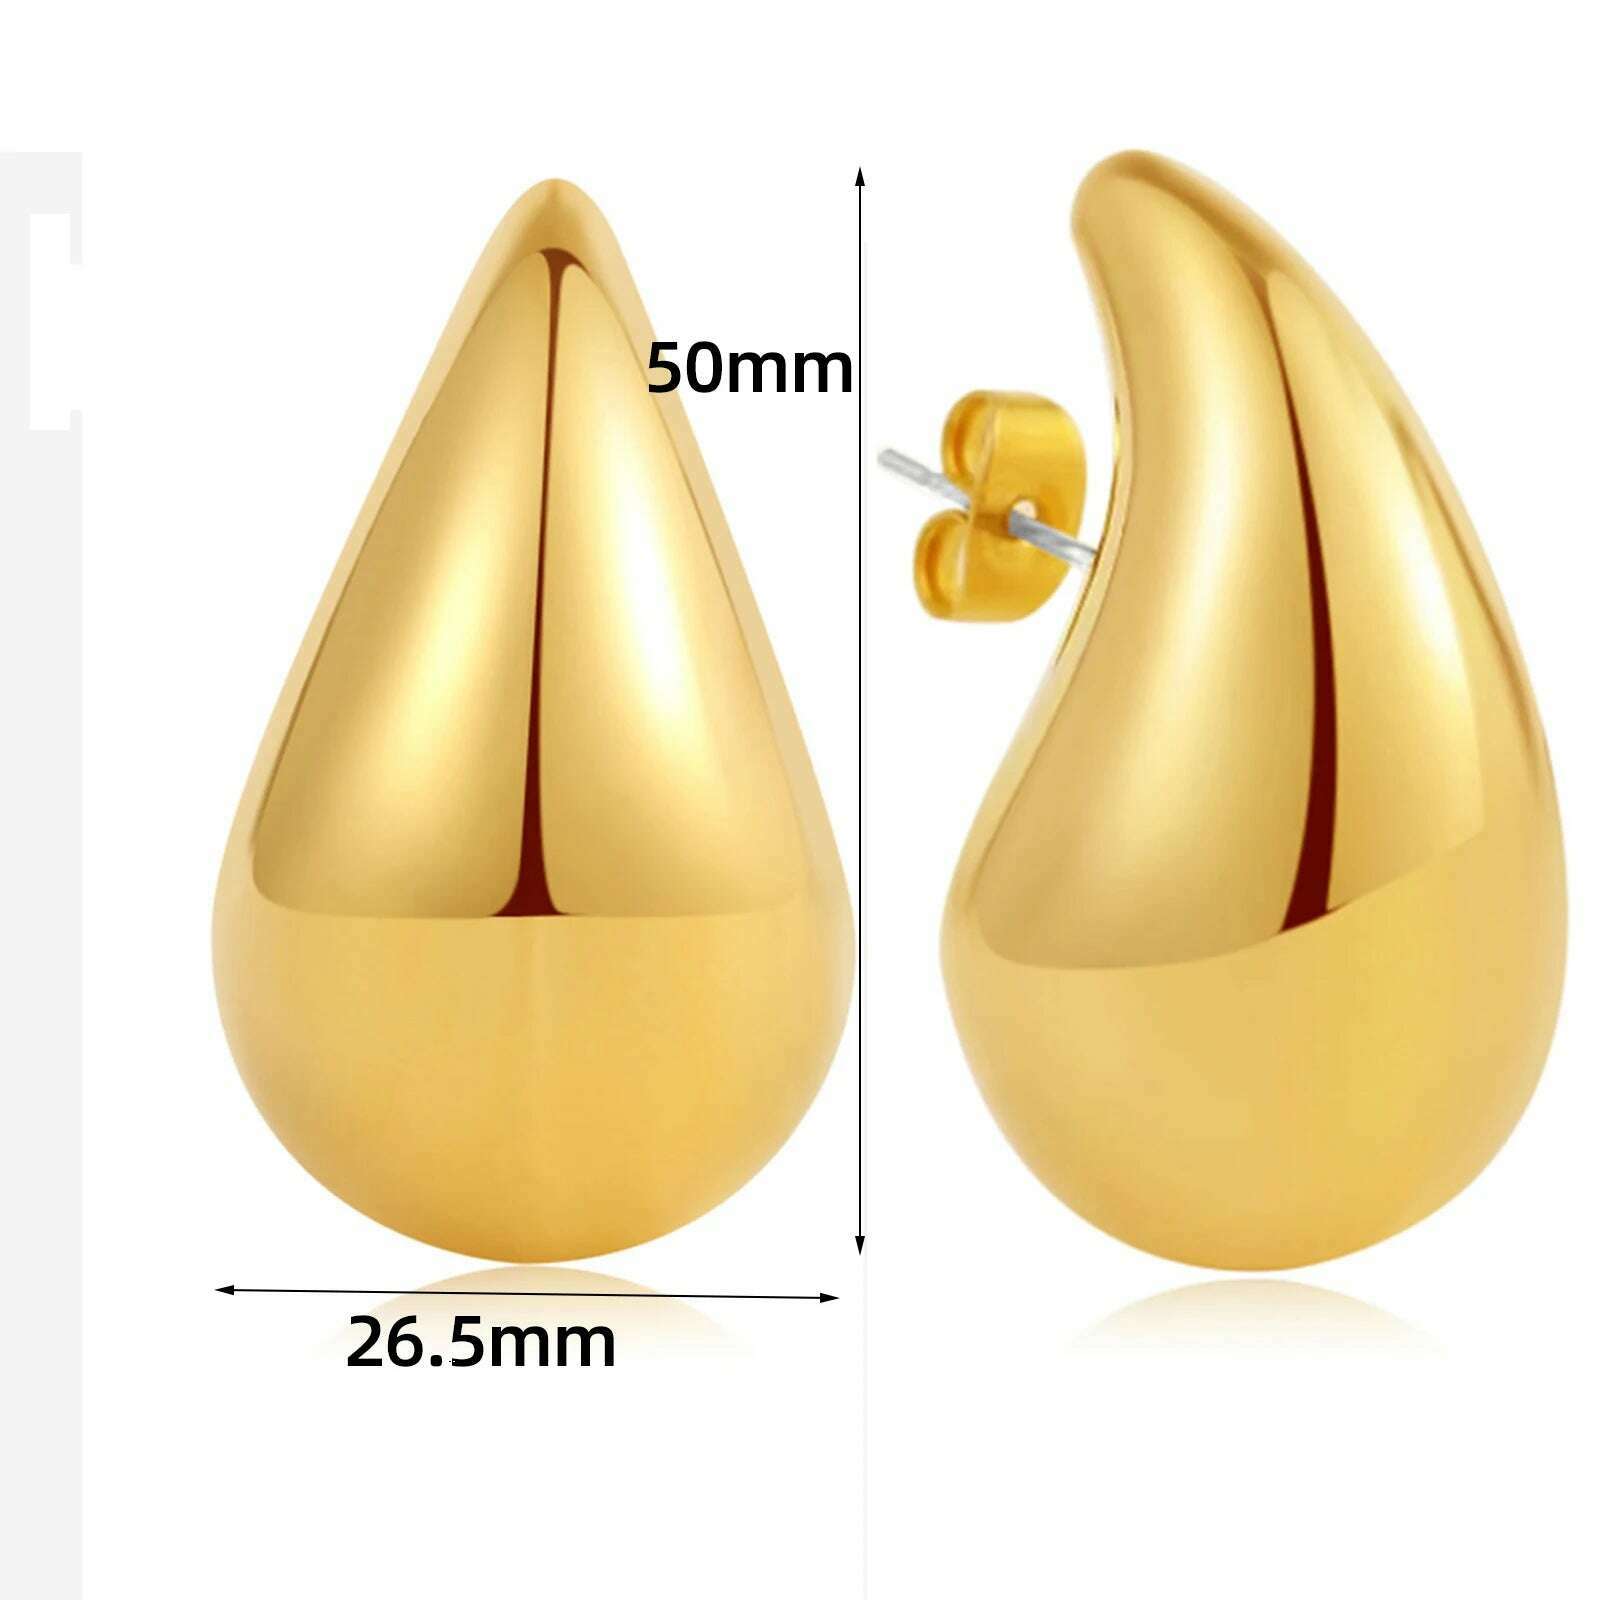 KIMLUD, Exaggerate 50mm Big Water Drop 18K Gold Plated Metal Oversize Dupes Thick Drop Earrings Lightweight Stainless Steel Jewelry New, KIMLUD Women's Clothes